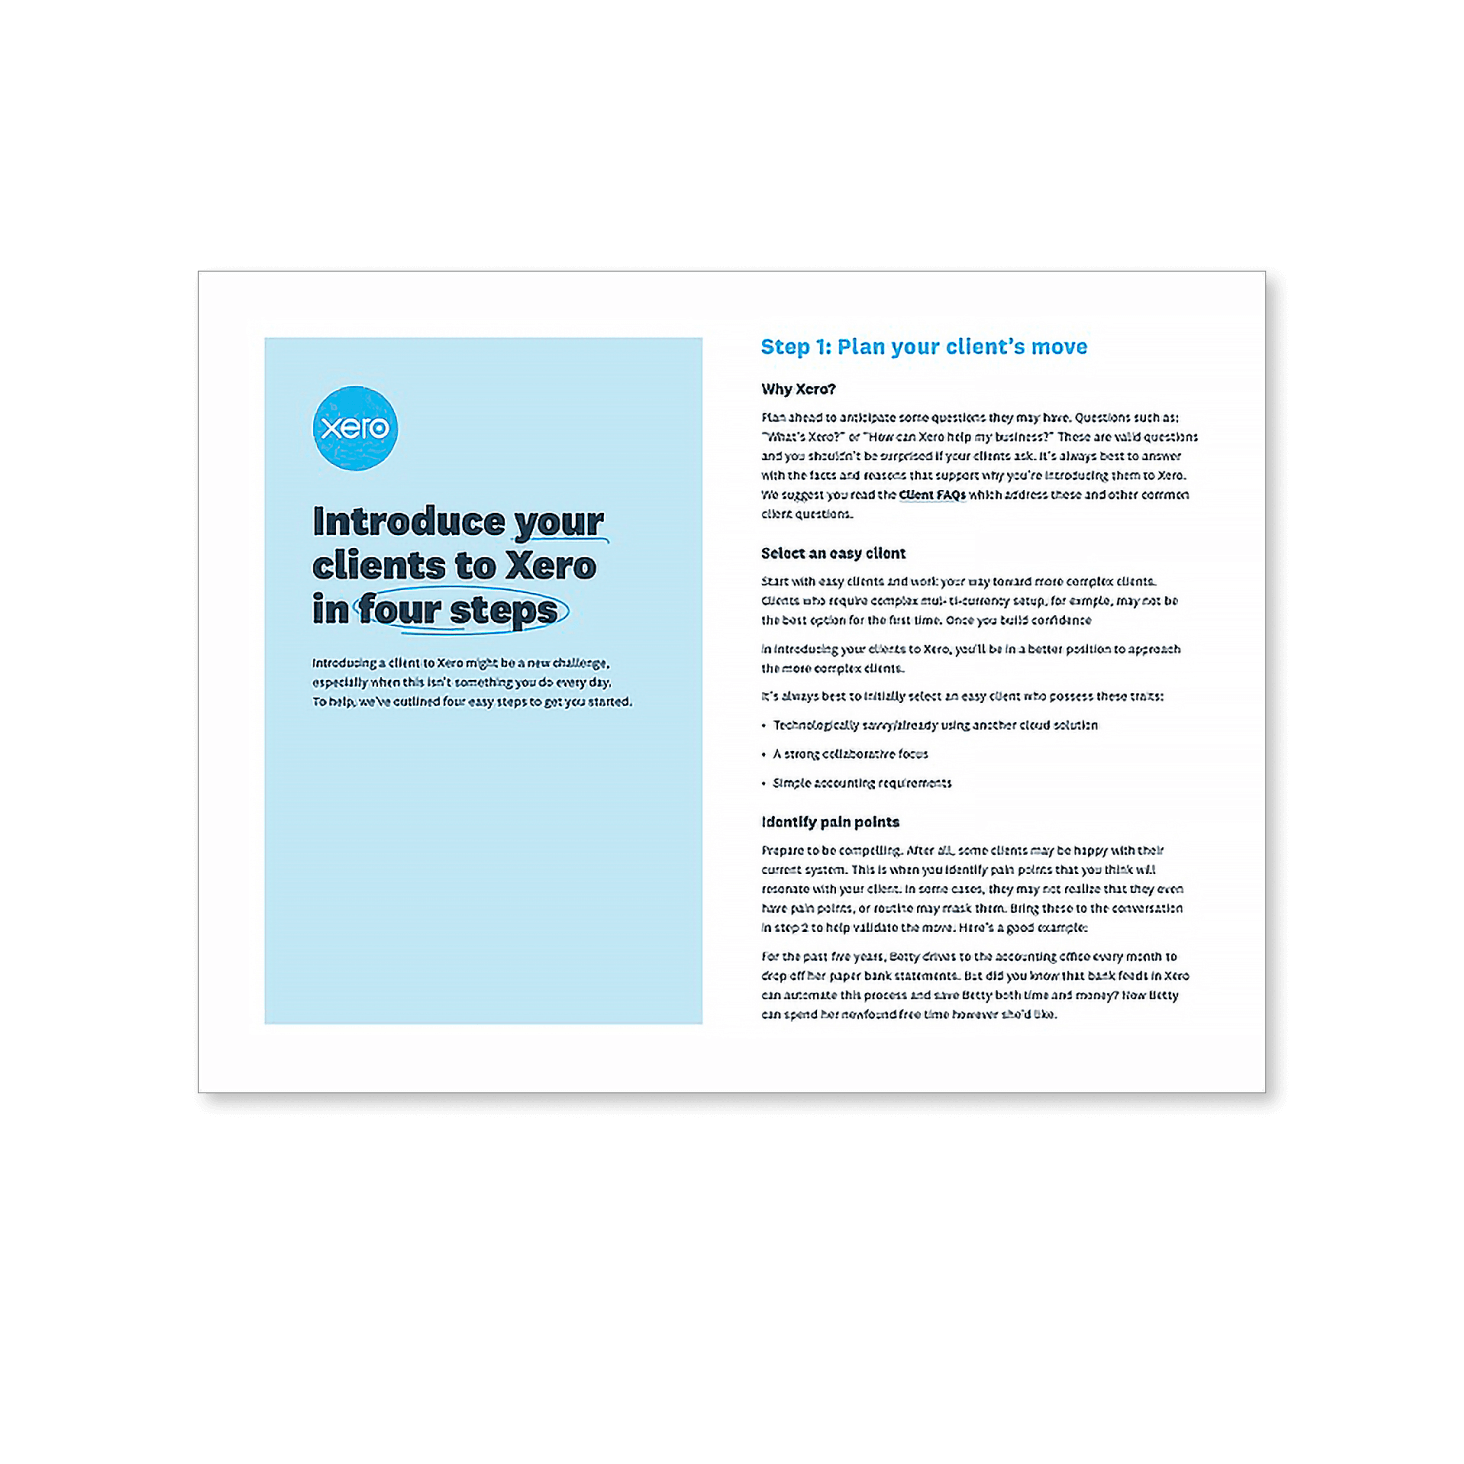 The cover and first page of the ‘Introduce your clients to Xero’ document.